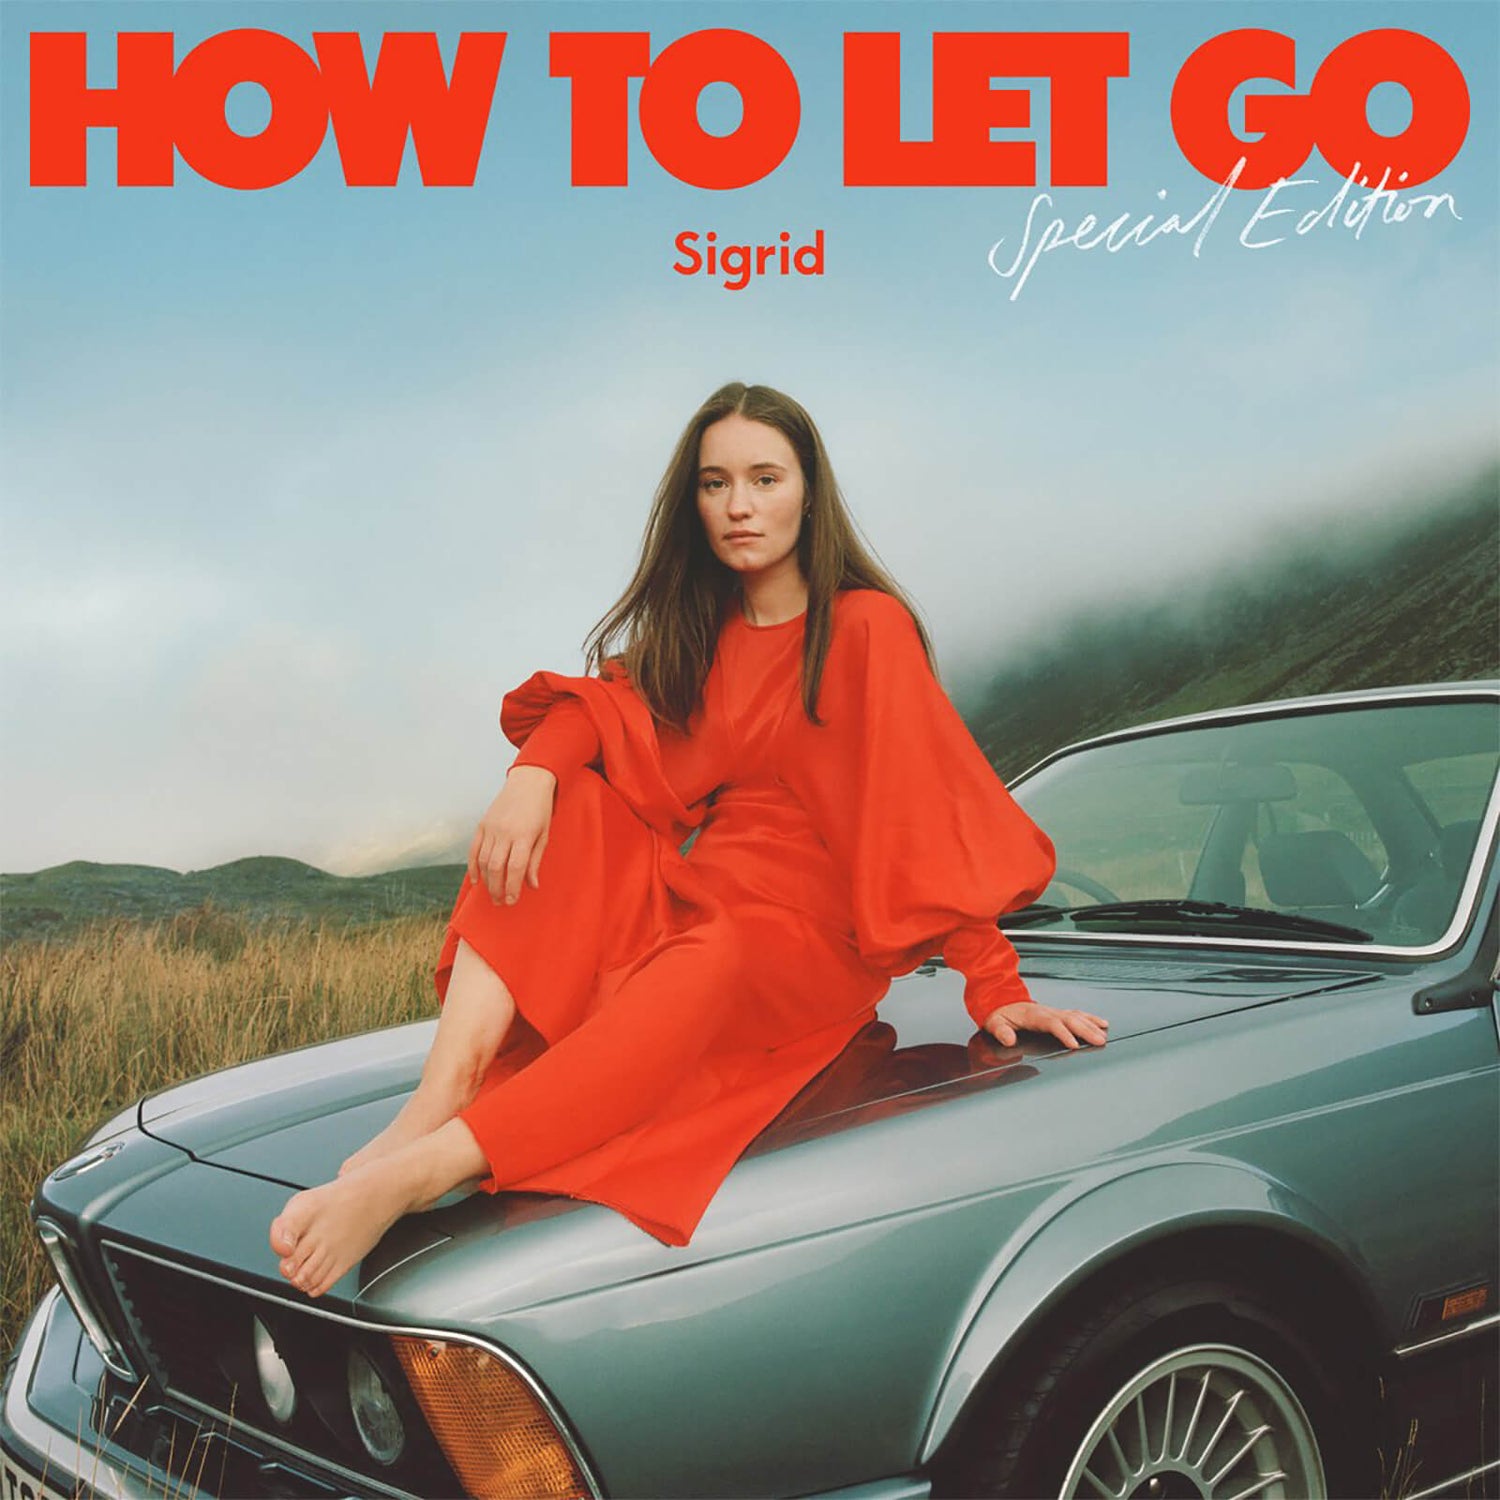 Sigrid - How To Let Go - Special Edition Vinyl 2LP